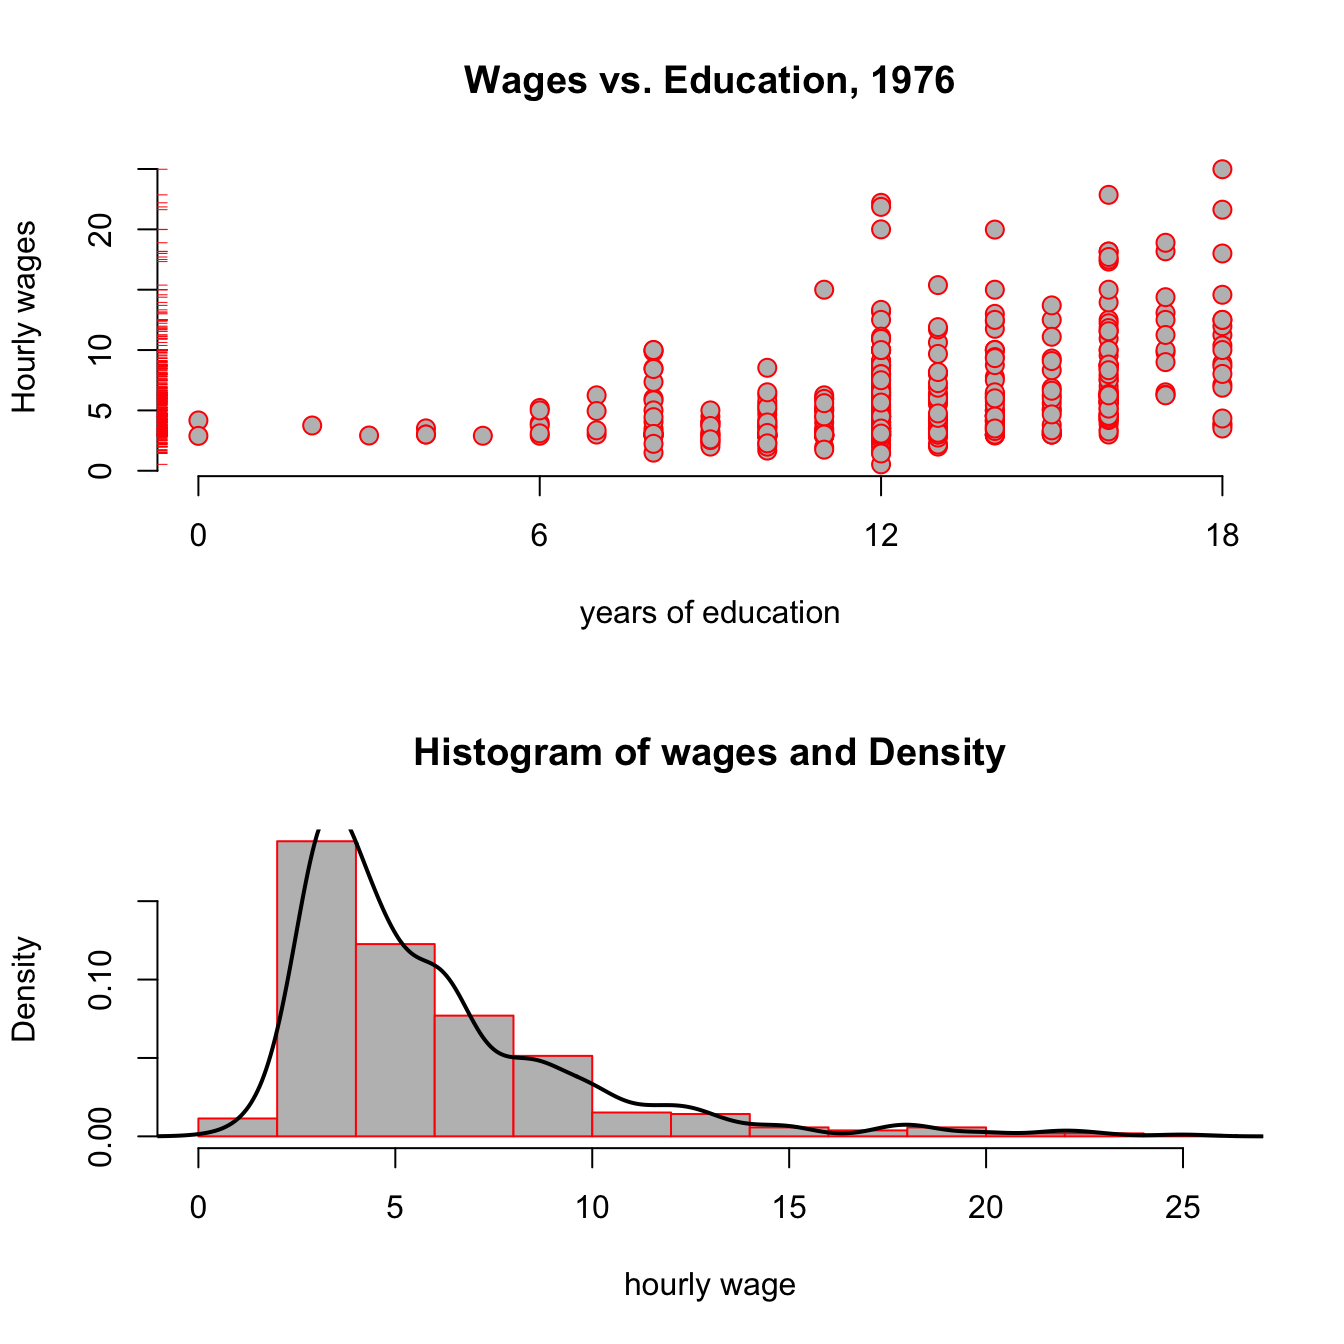 Wages vs Education from the wooldridge dataset wage1.